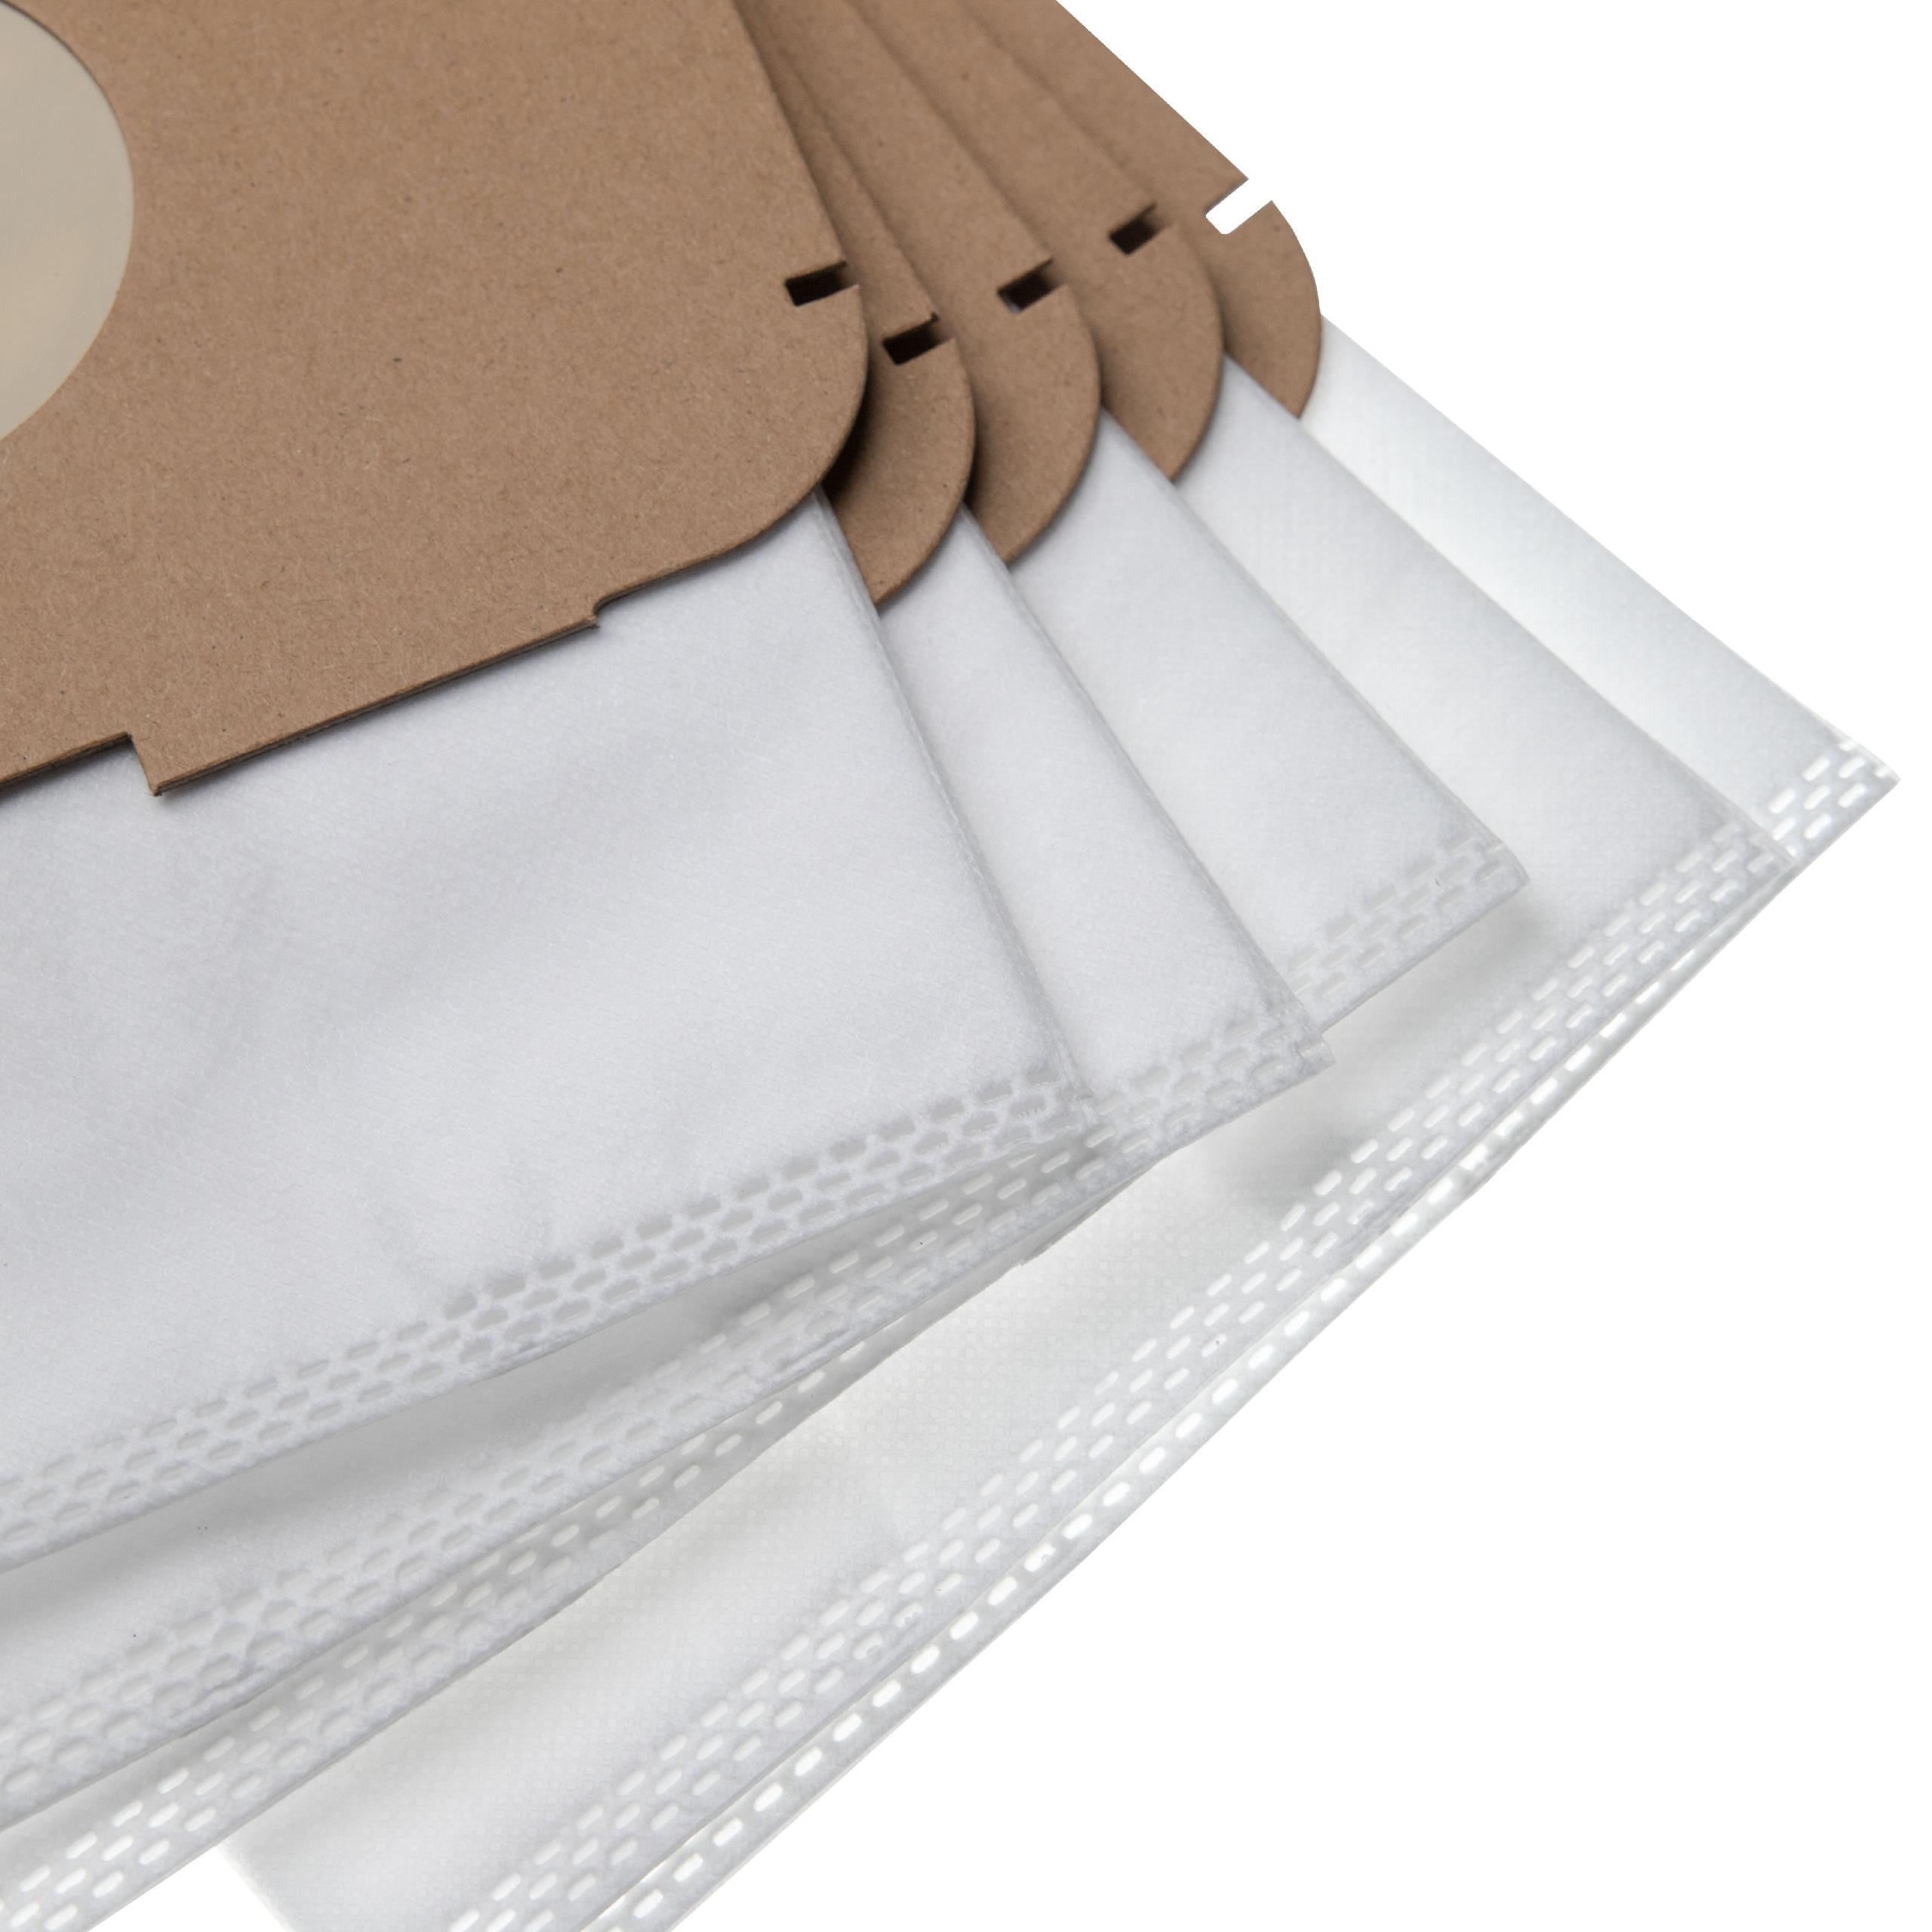 5x Vacuum Cleaner Bag replaces Lux 111000150 for Lux - microfleece